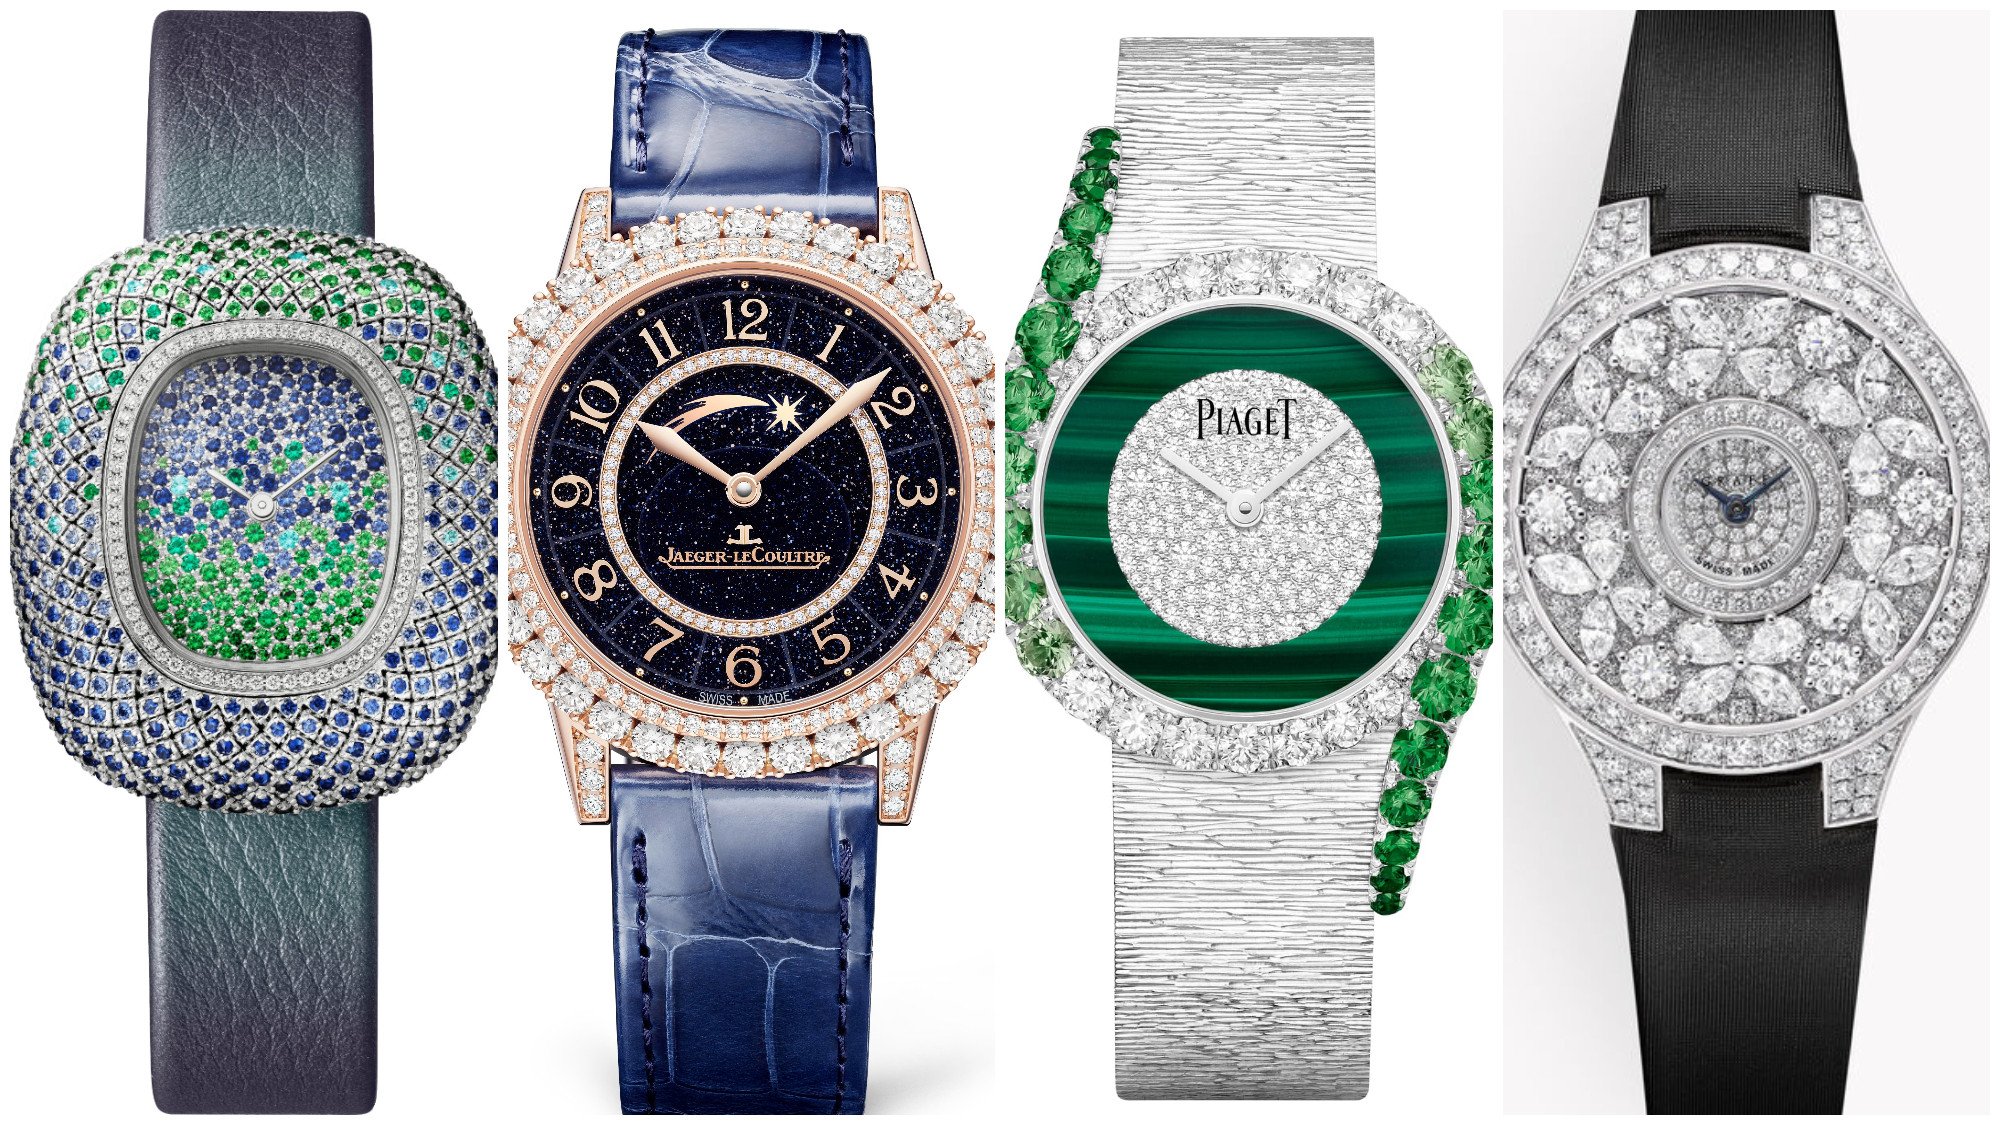 Cartier, Jaeger-LeCoultre, Piaget and Graff offer beautiful diamond-encrusted timepieces for every occasion. Photos: Handout